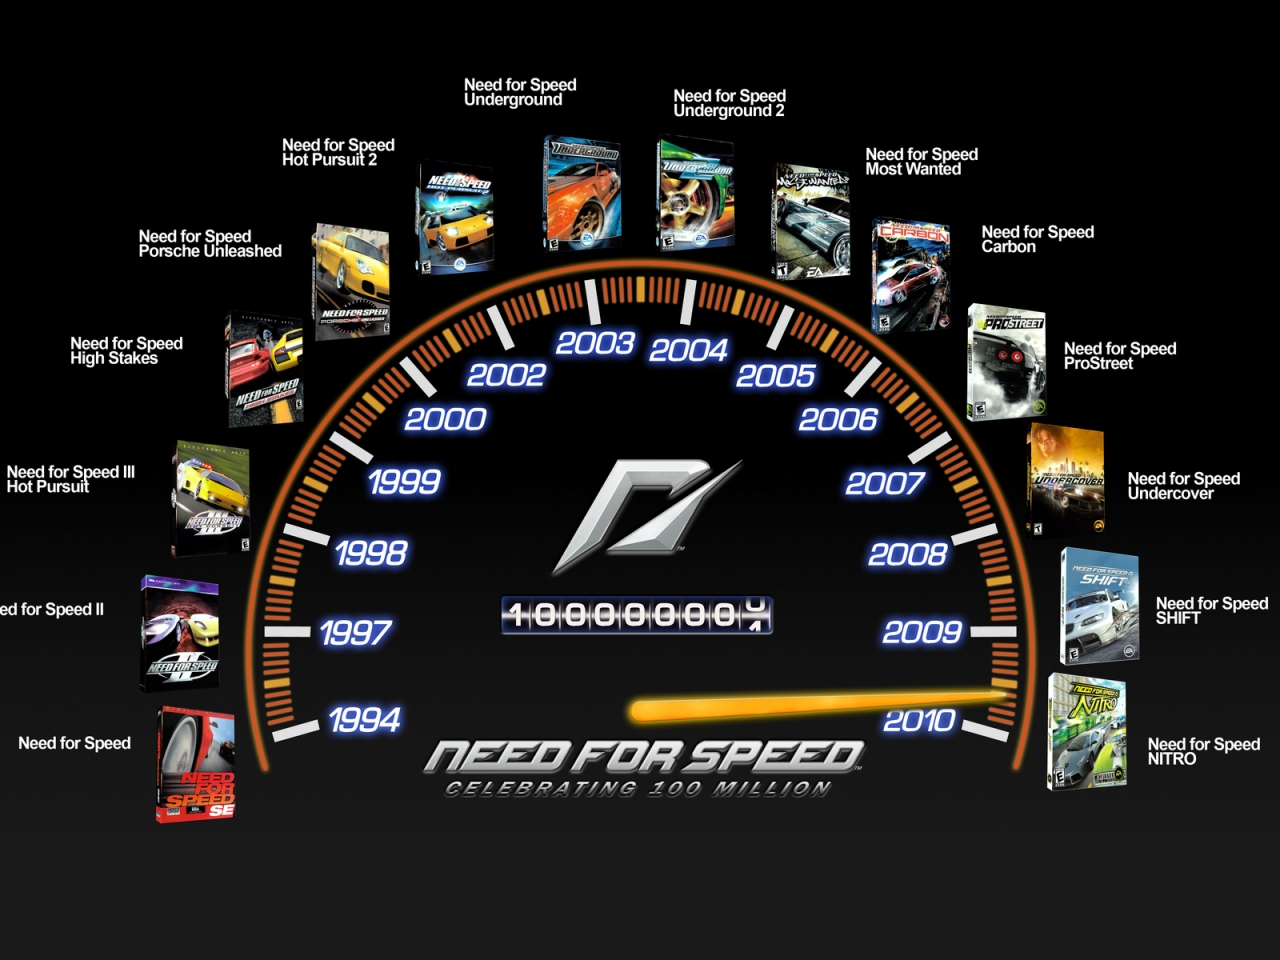 Need for Speed Celebration for 1280 x 960 resolution